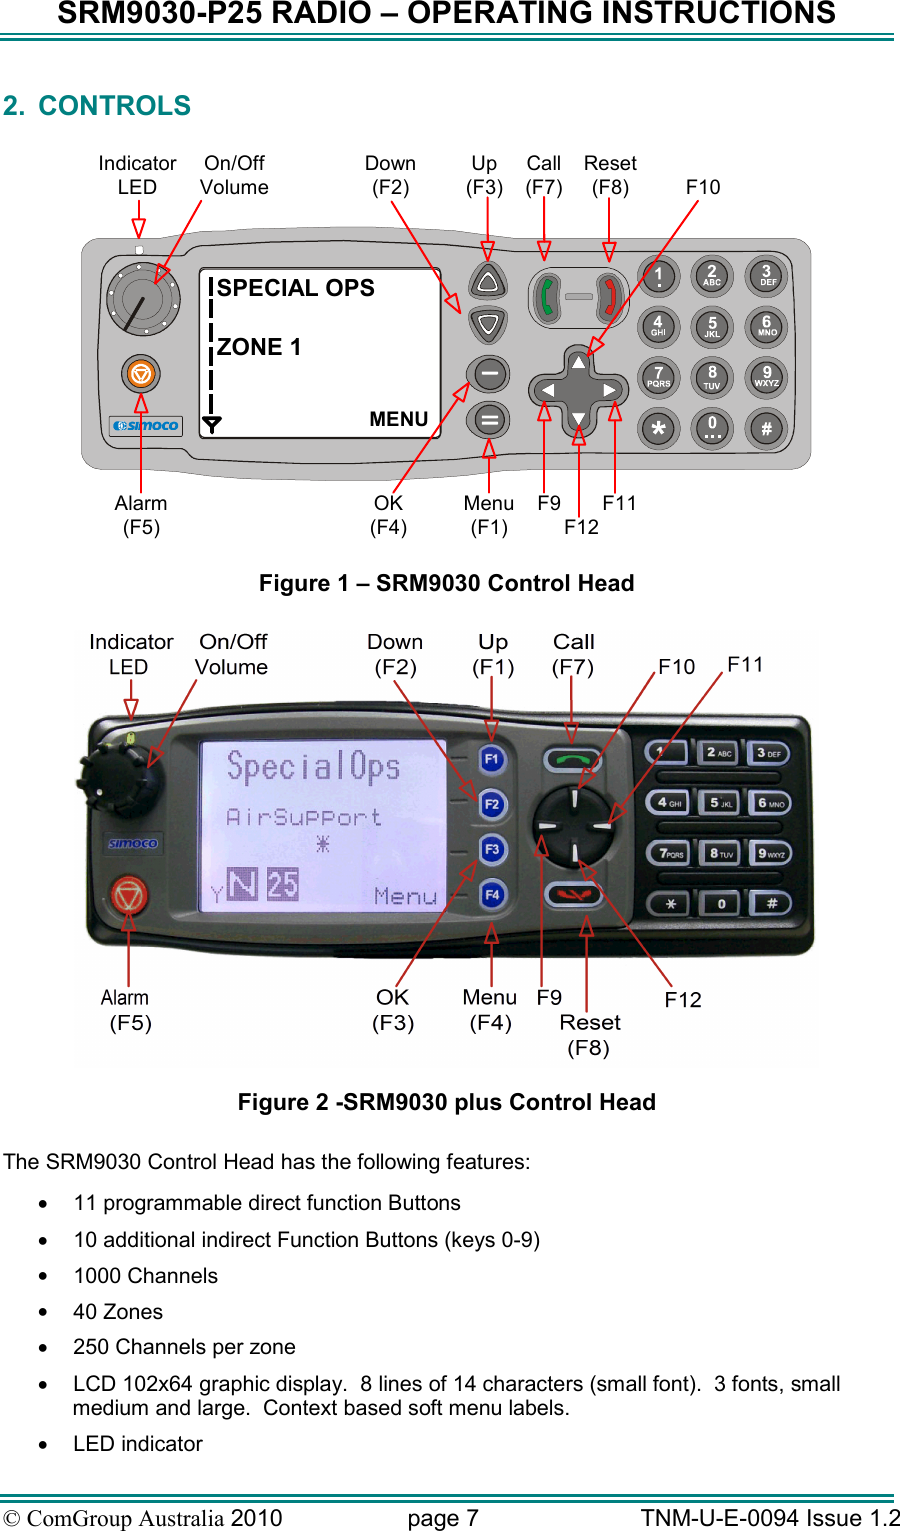 SRM9030-P25 RADIO – OPERATING INSTRUCTIONS © ComGroup Australia 2010  page 7   TNM-U-E-0094 Issue 1.2 2.  CONTROLS  SPECIAL OPSZONE 1MENUOn/OffVolumeIndicatorLEDDown(F2)Up(F3)Call(F7)Reset(F8) F10Alarm(F5)OK(F4)Menu(F1)F9F12F11 Figure 1 – SRM9030 Control Head   Figure 2 -SRM9030 plus Control Head  The SRM9030 Control Head has the following features: •  11 programmable direct function Buttons •  10 additional indirect Function Buttons (keys 0-9) •  1000 Channels •  40 Zones  •  250 Channels per zone •  LCD 102x64 graphic display.  8 lines of 14 characters (small font).  3 fonts, small medium and large.  Context based soft menu labels. •  LED indicator 